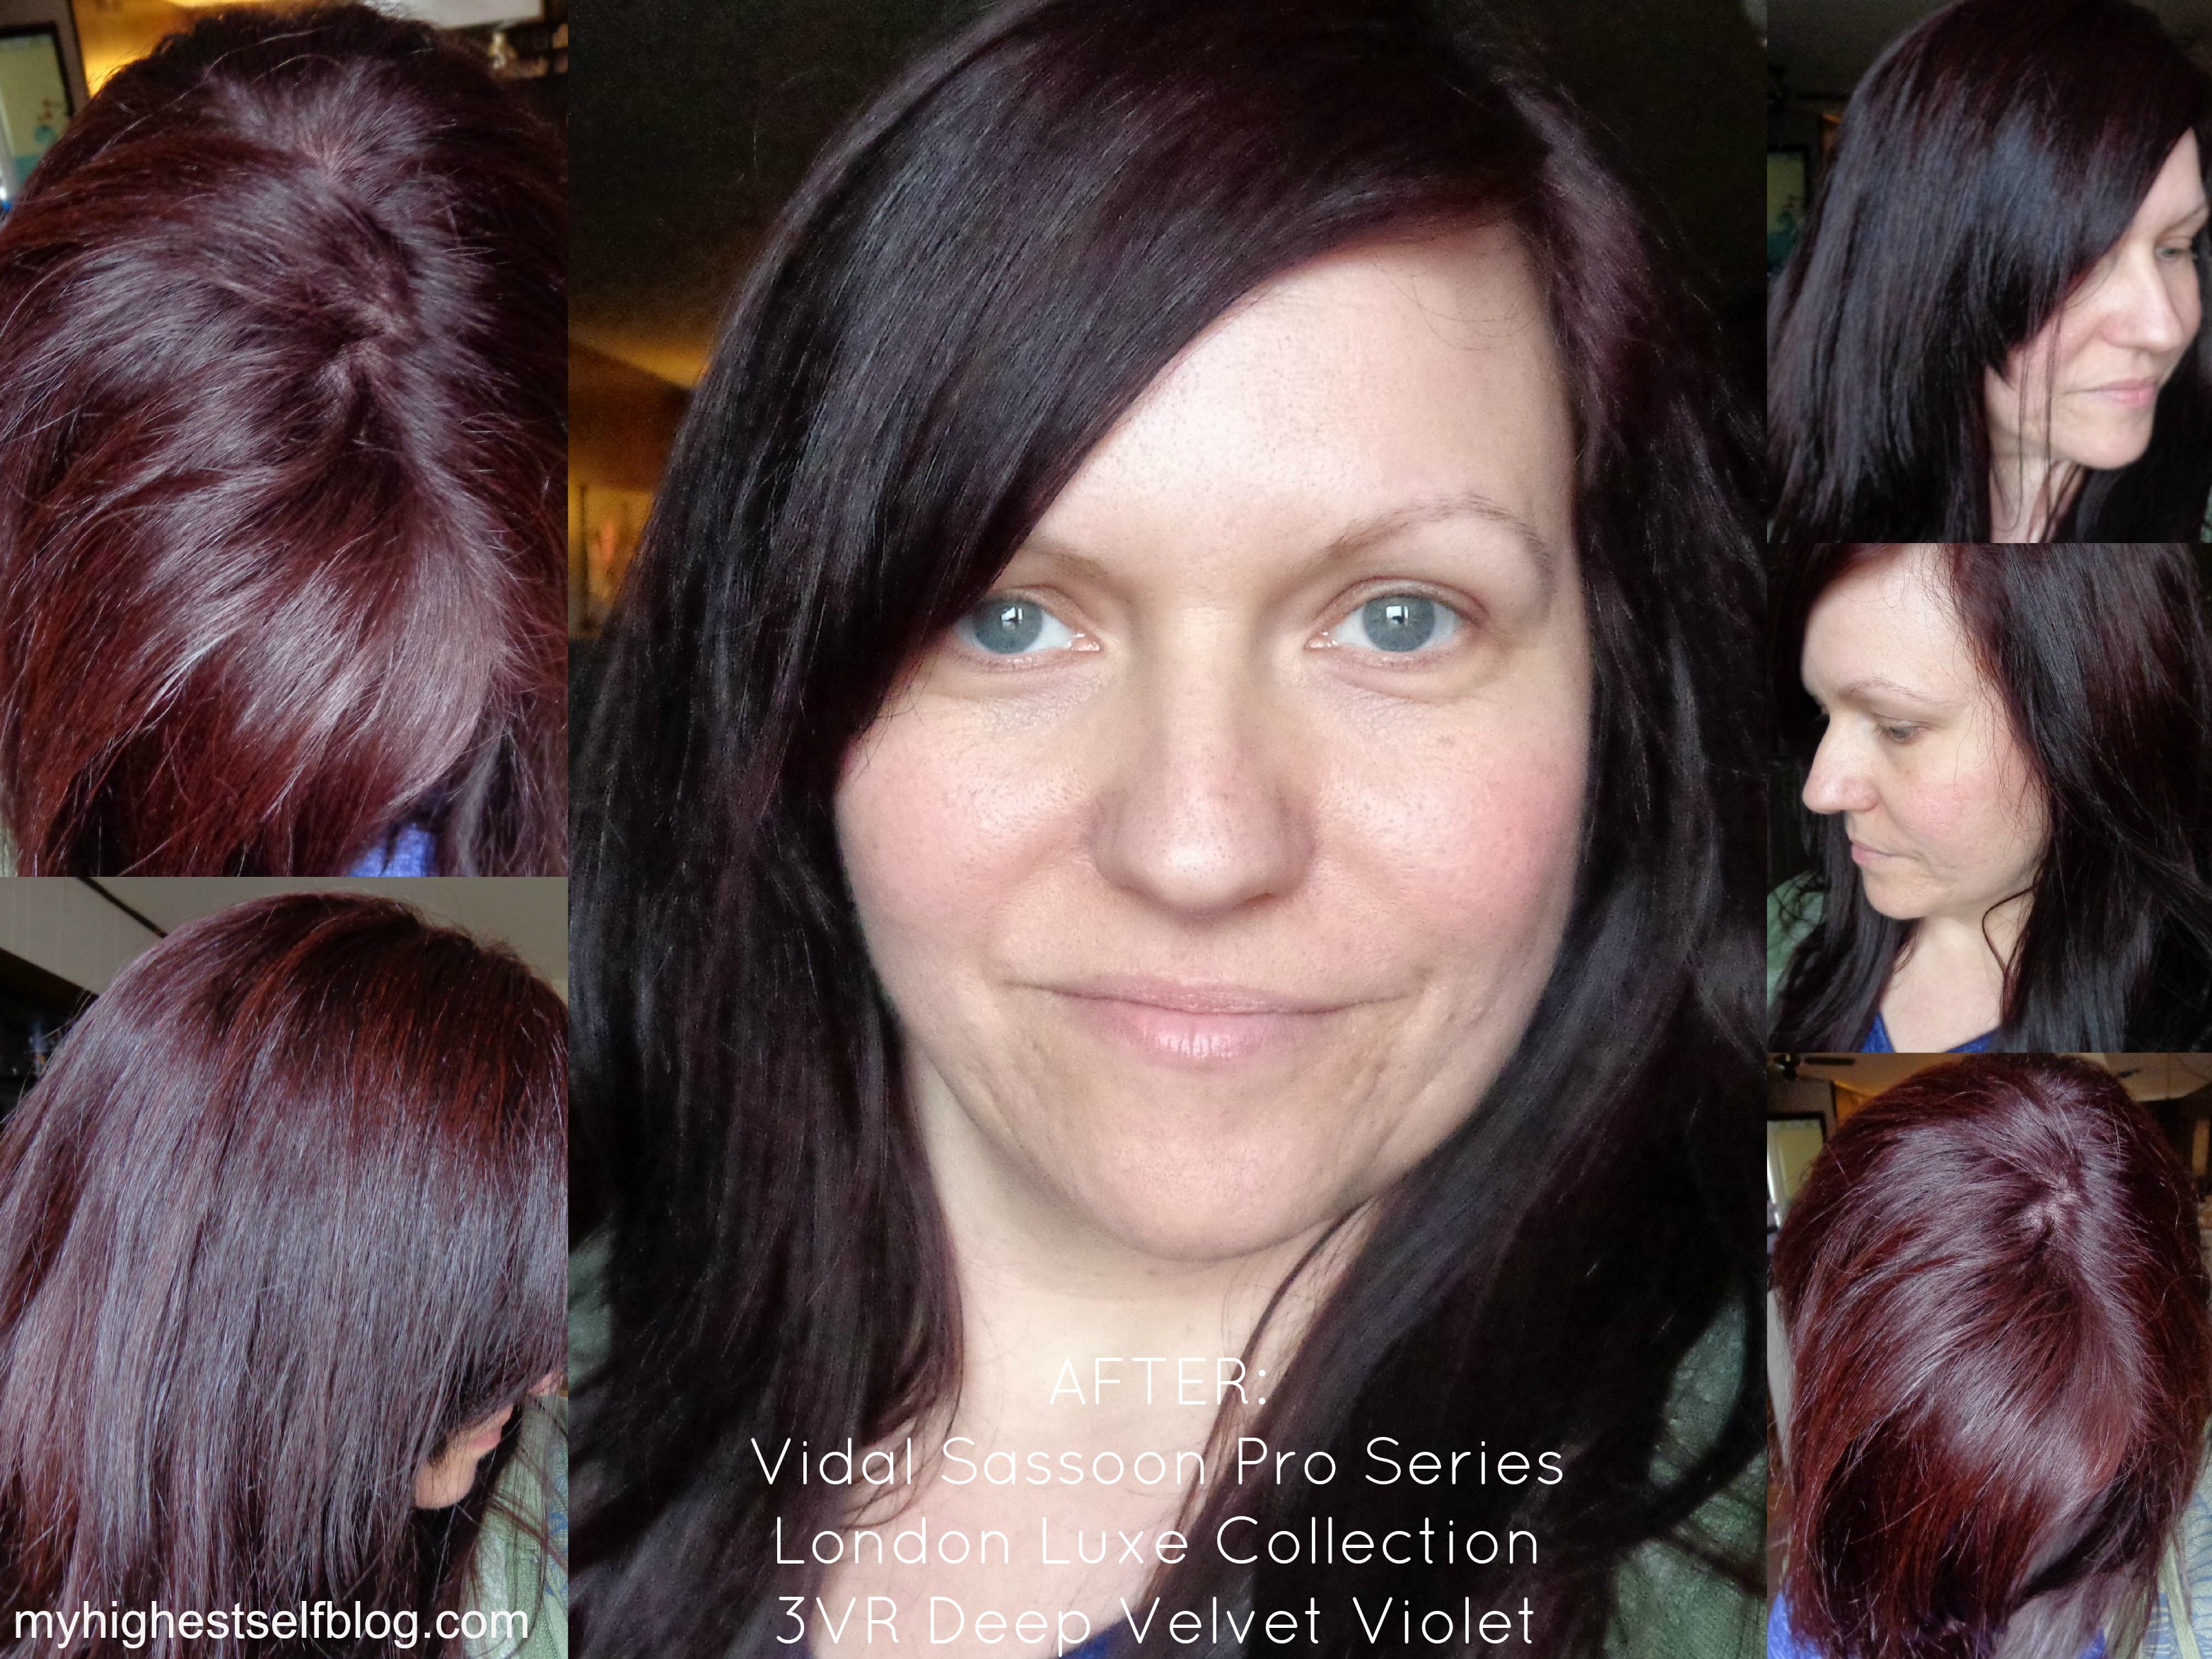 Review with Before and After Photos: Vidal Sassoon Pro Series Hair Color  London Luxe Collection - Deep Velvet Violet (3VR) - My Highest Self